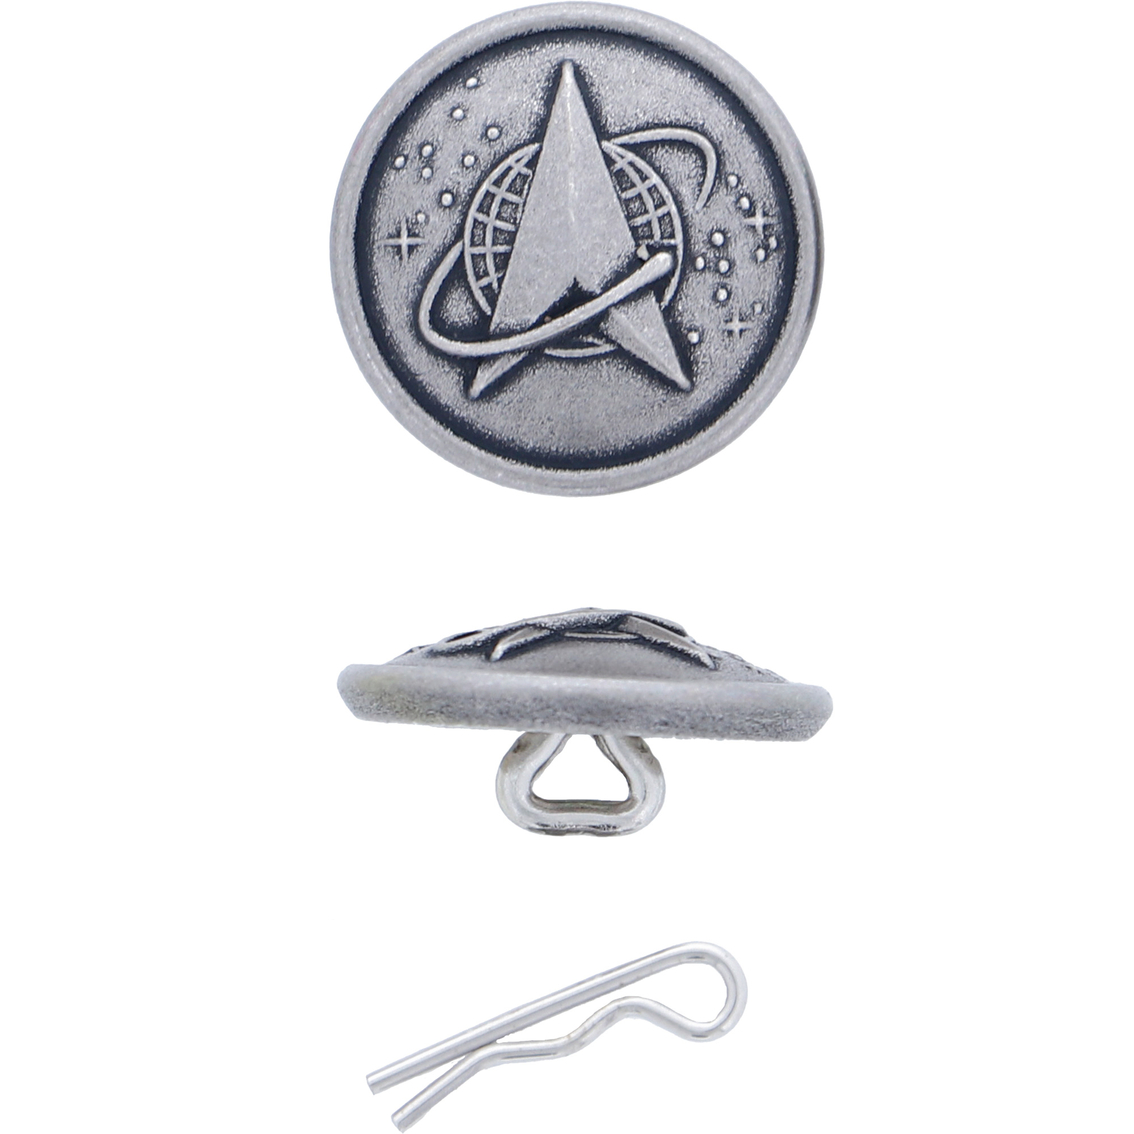 Space Force Button 36L Silver Oxide 2 pk. - Image 2 of 4